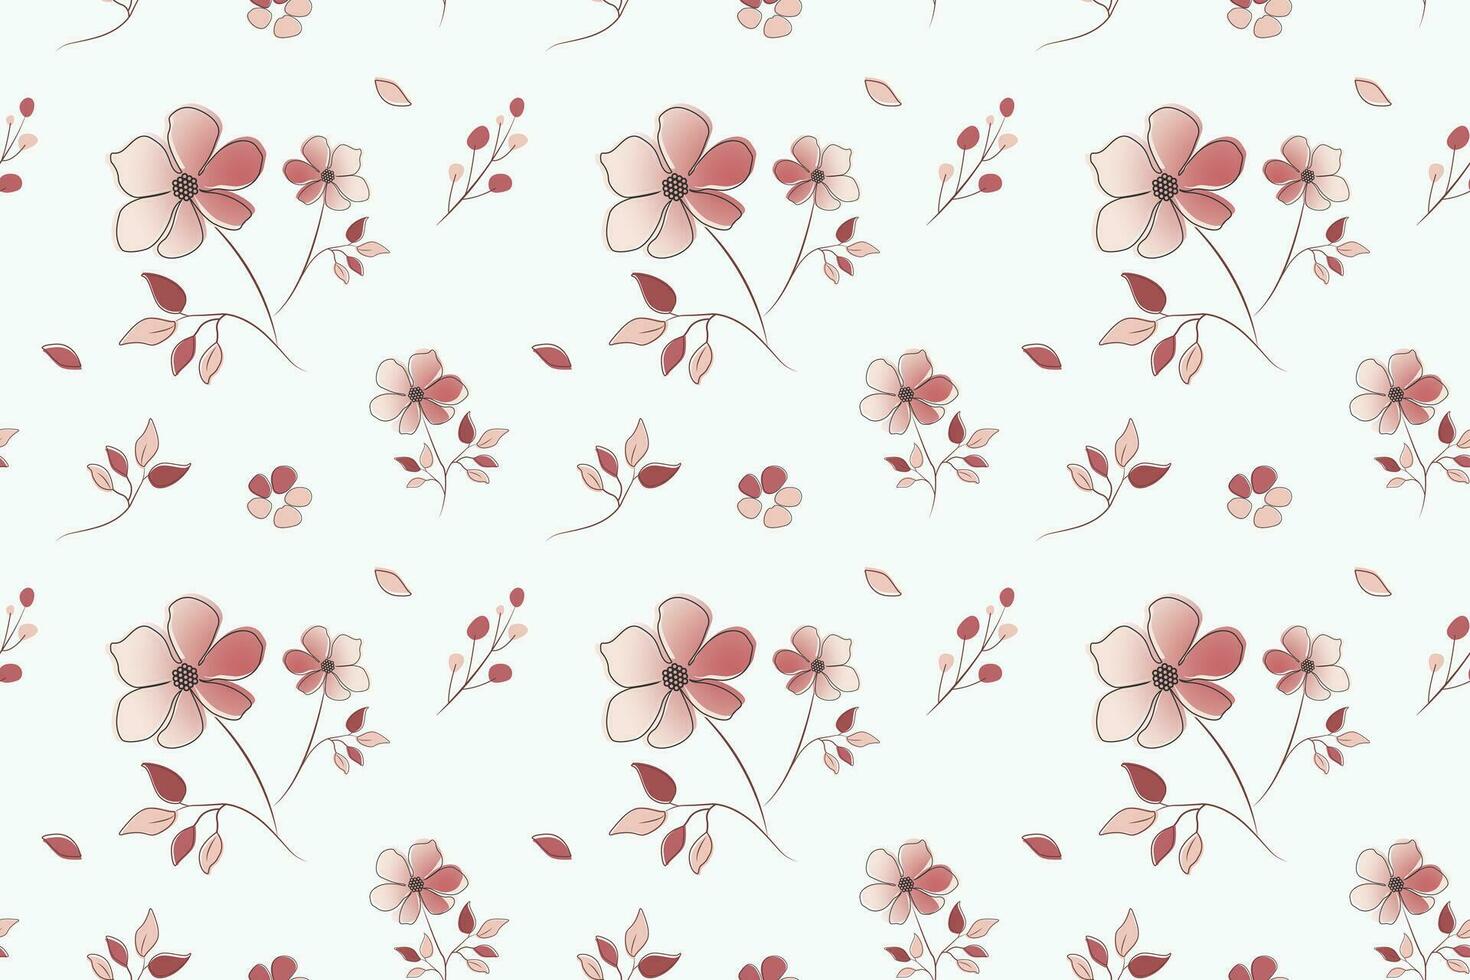 Vintage seamless floral pattern. Minimal style background of small pastel color flowers. Small blooming flowers are scattered over a white background. Stock vector for printing on surfaces.